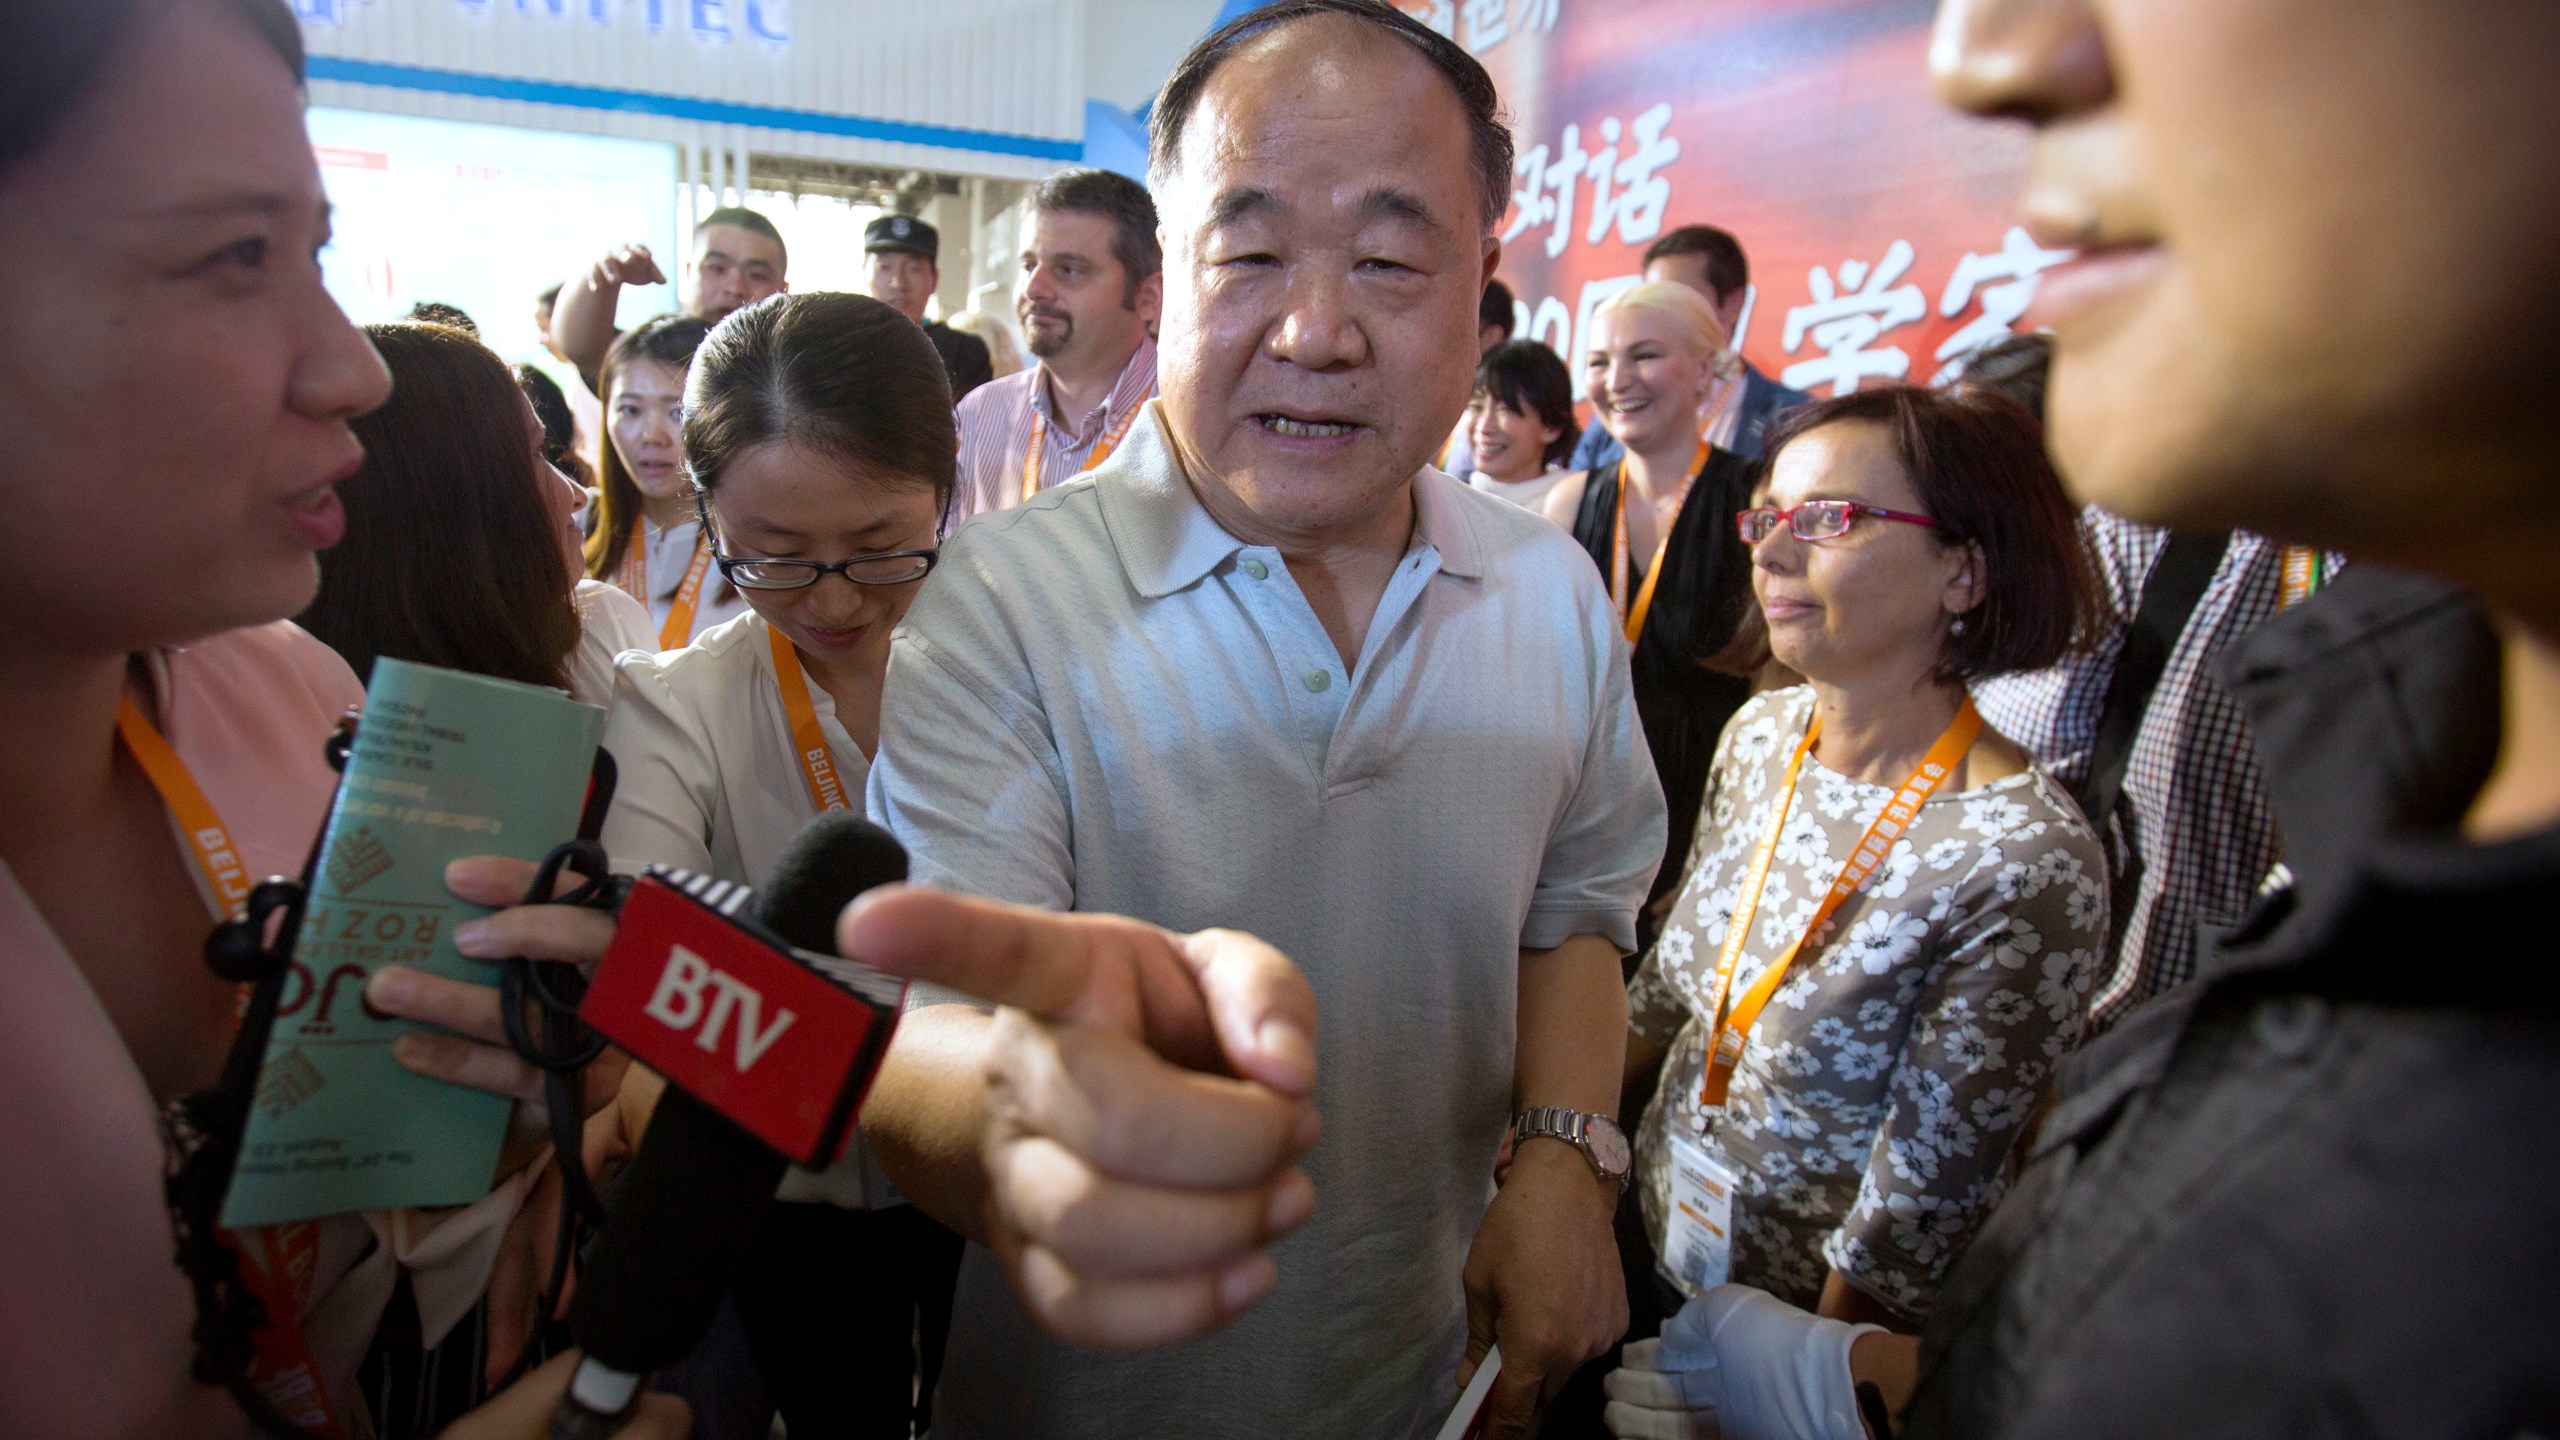 FILE - Chinese Literature Nobel Prize winner Mo Yan, center, leaves following a panel discussion at the Beijing International Book Fair in Beijing, Wednesday, Aug. 23, 2017. Mo Yan, one of China's most celebrated authors, who won the country's first Nobel Prize for literature and was once praised by top officials, is now at a center of a nationalist storm, indicating the shifting lines for freedom of expression under Chinese President Xi Jinping. (AP Photo/Mark Schiefelbein, File)